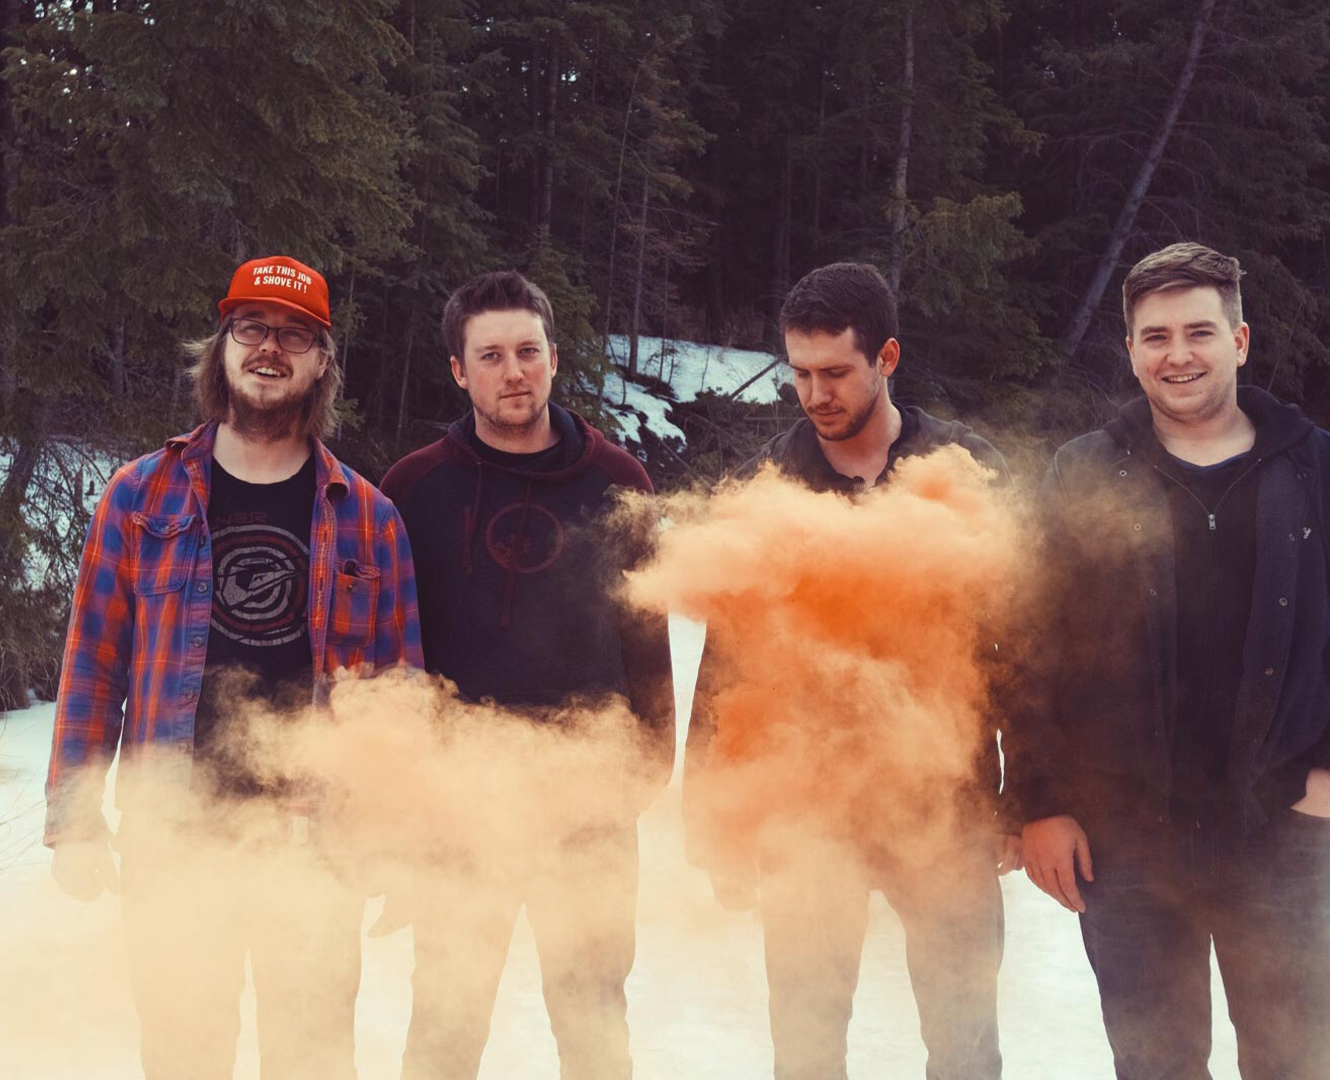 Local Edmonton band, SHAG, releases new music